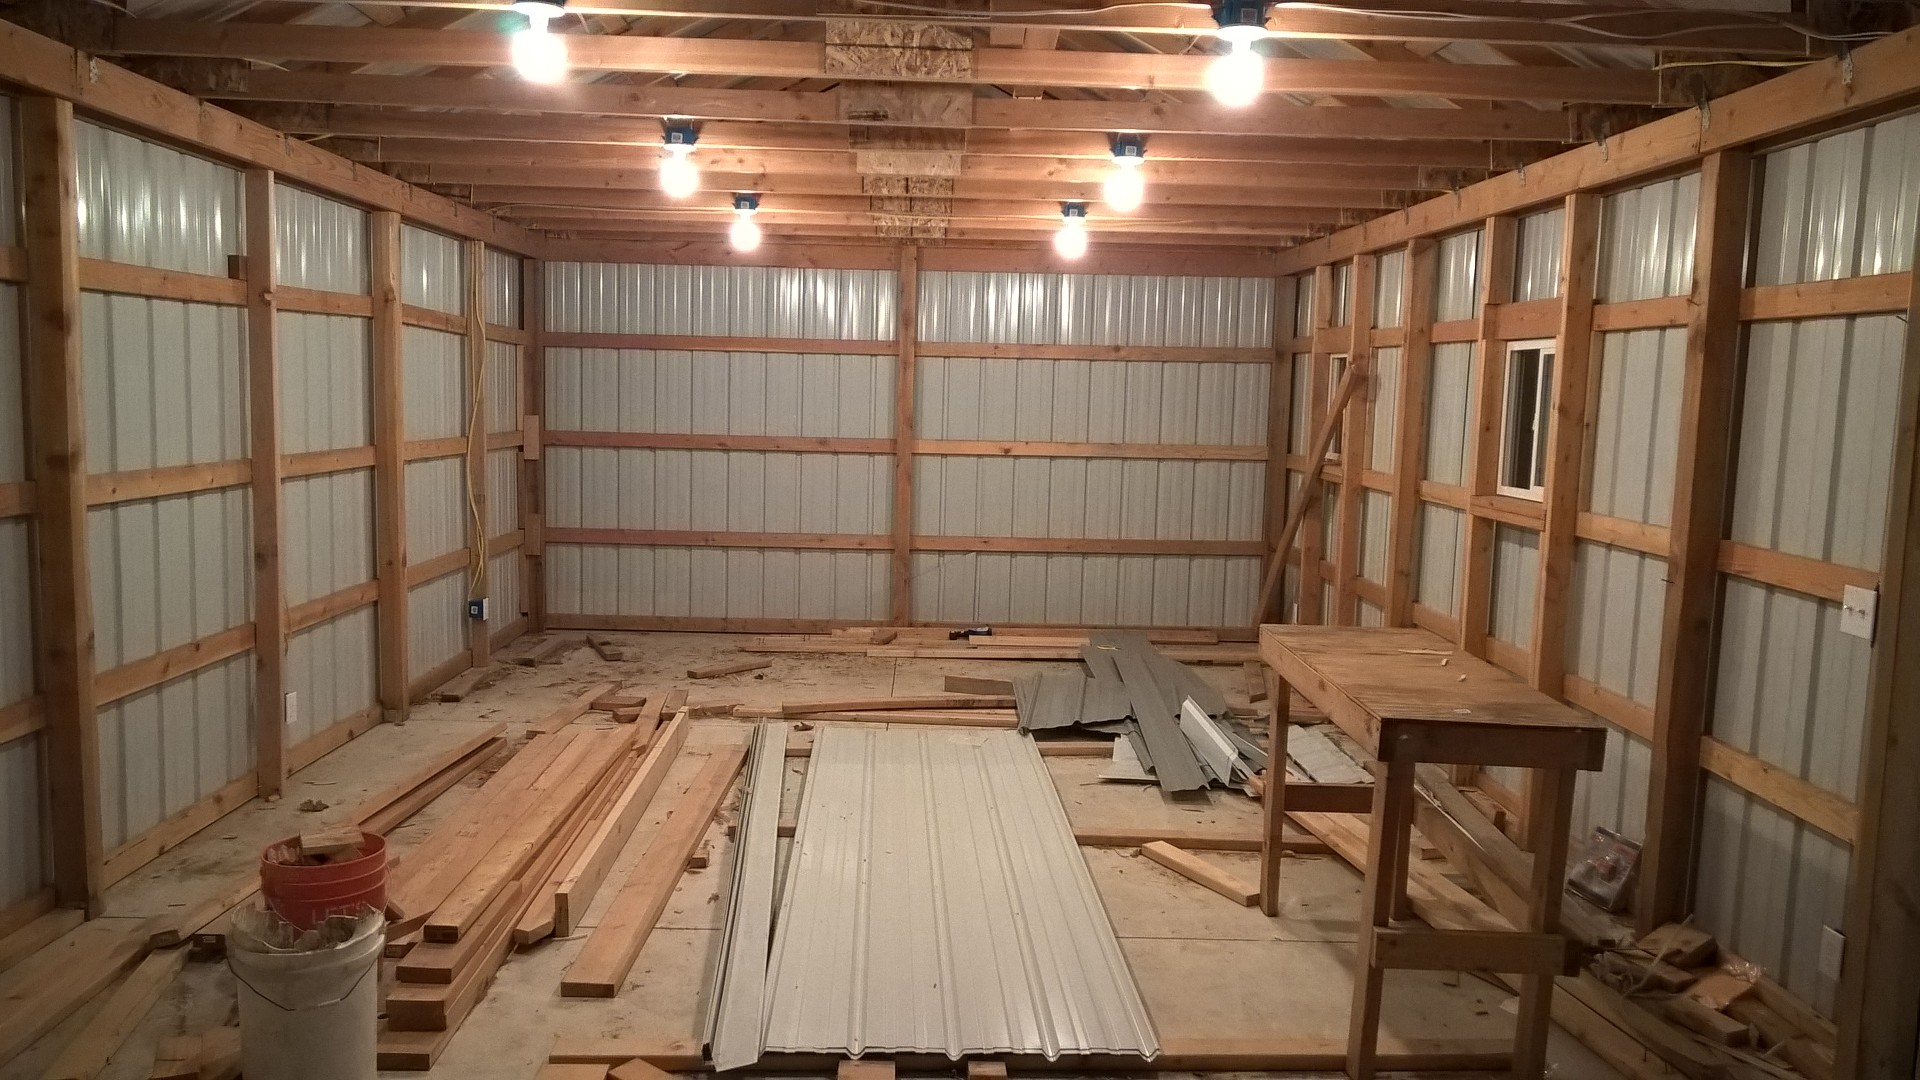 Building A Pole Barn Shed From Scratch P4 – Planning Pole Barn